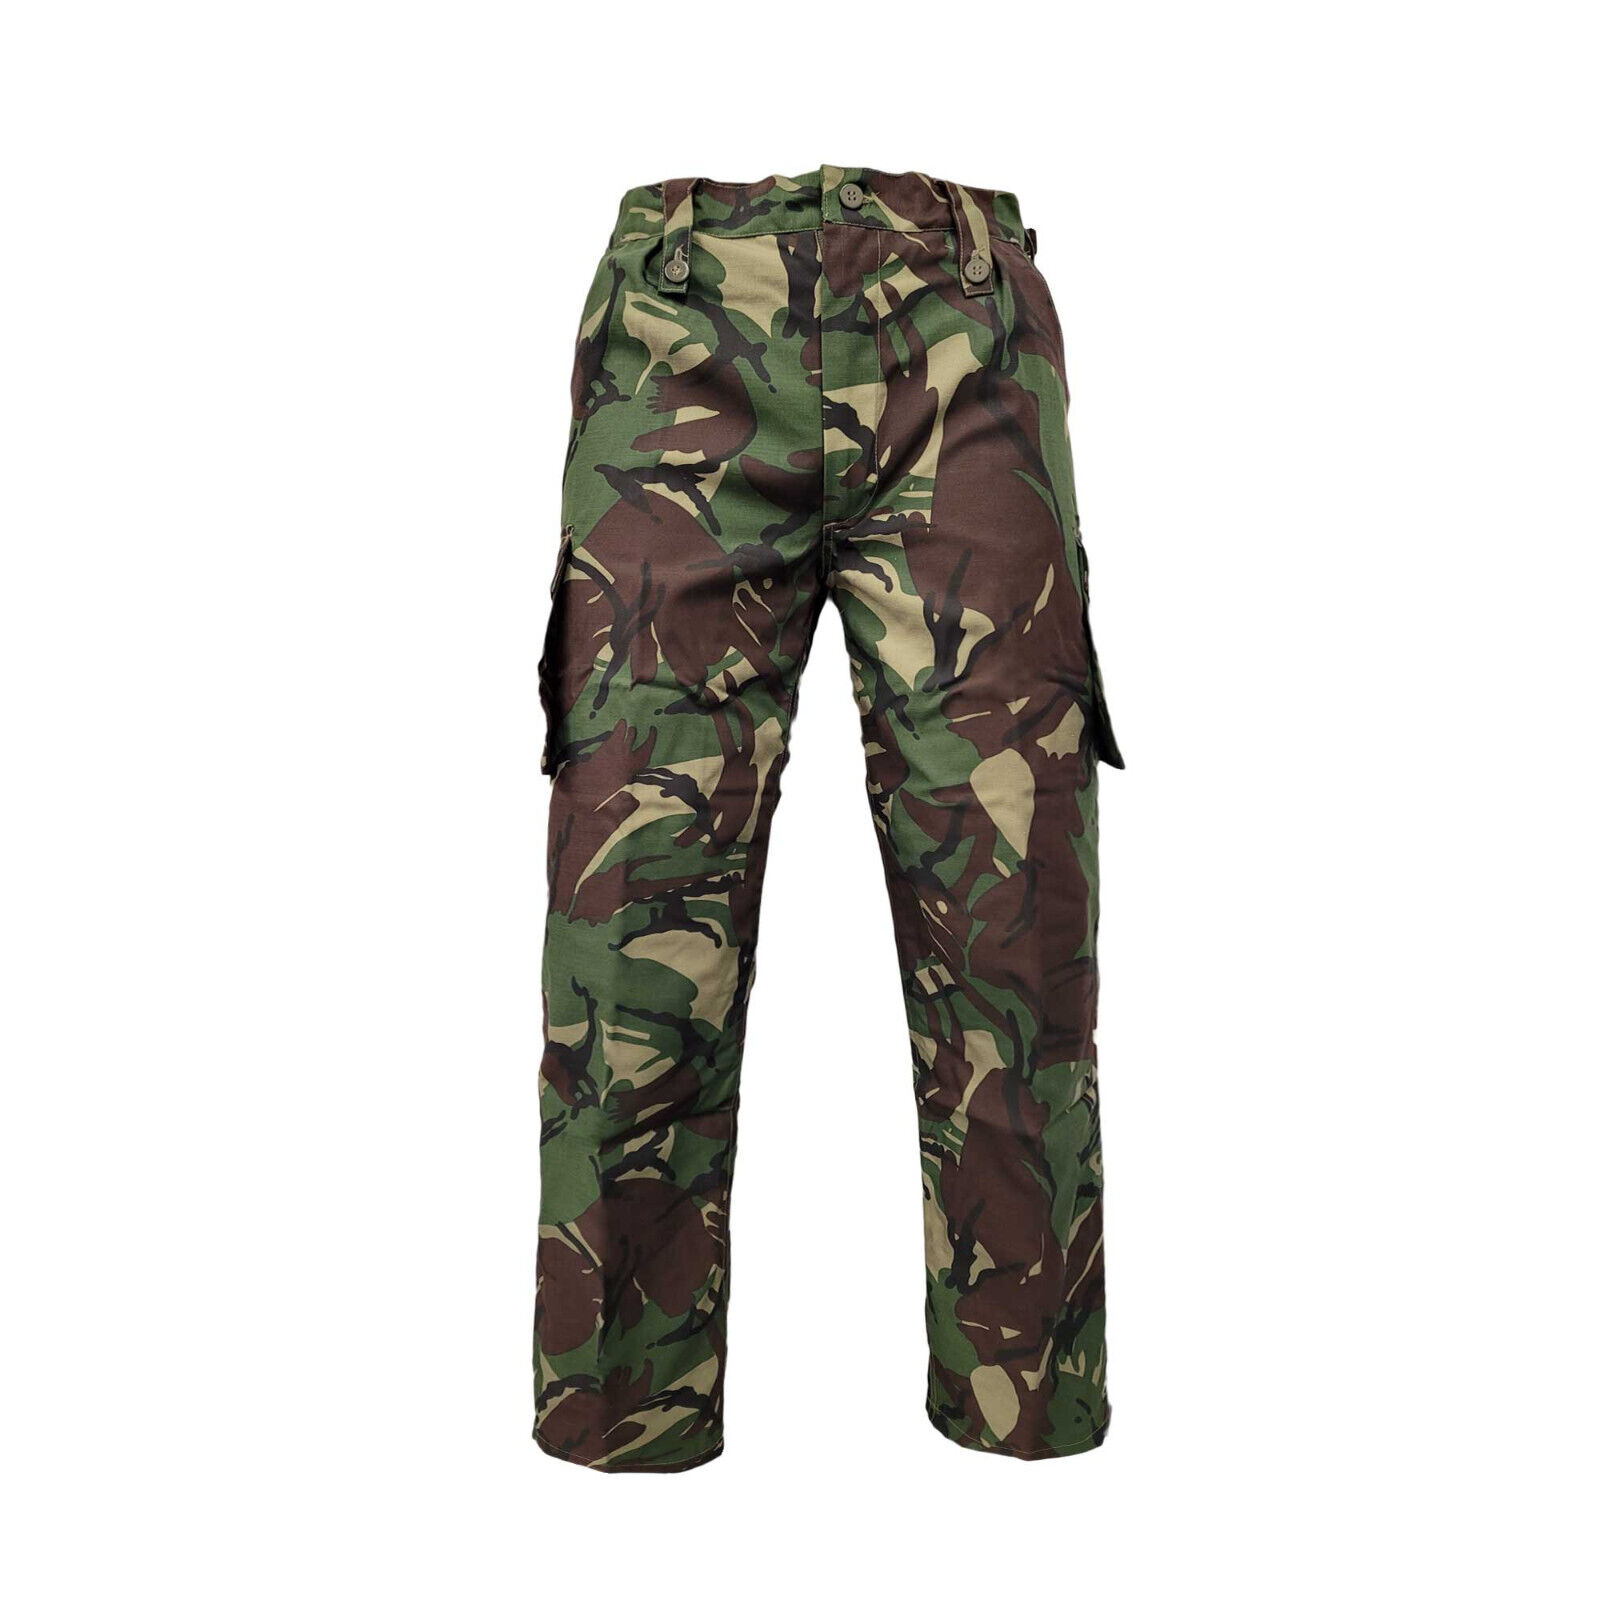 British Army Style DPM Camo Combat Trousers Sport Hunting Tactical Pants New